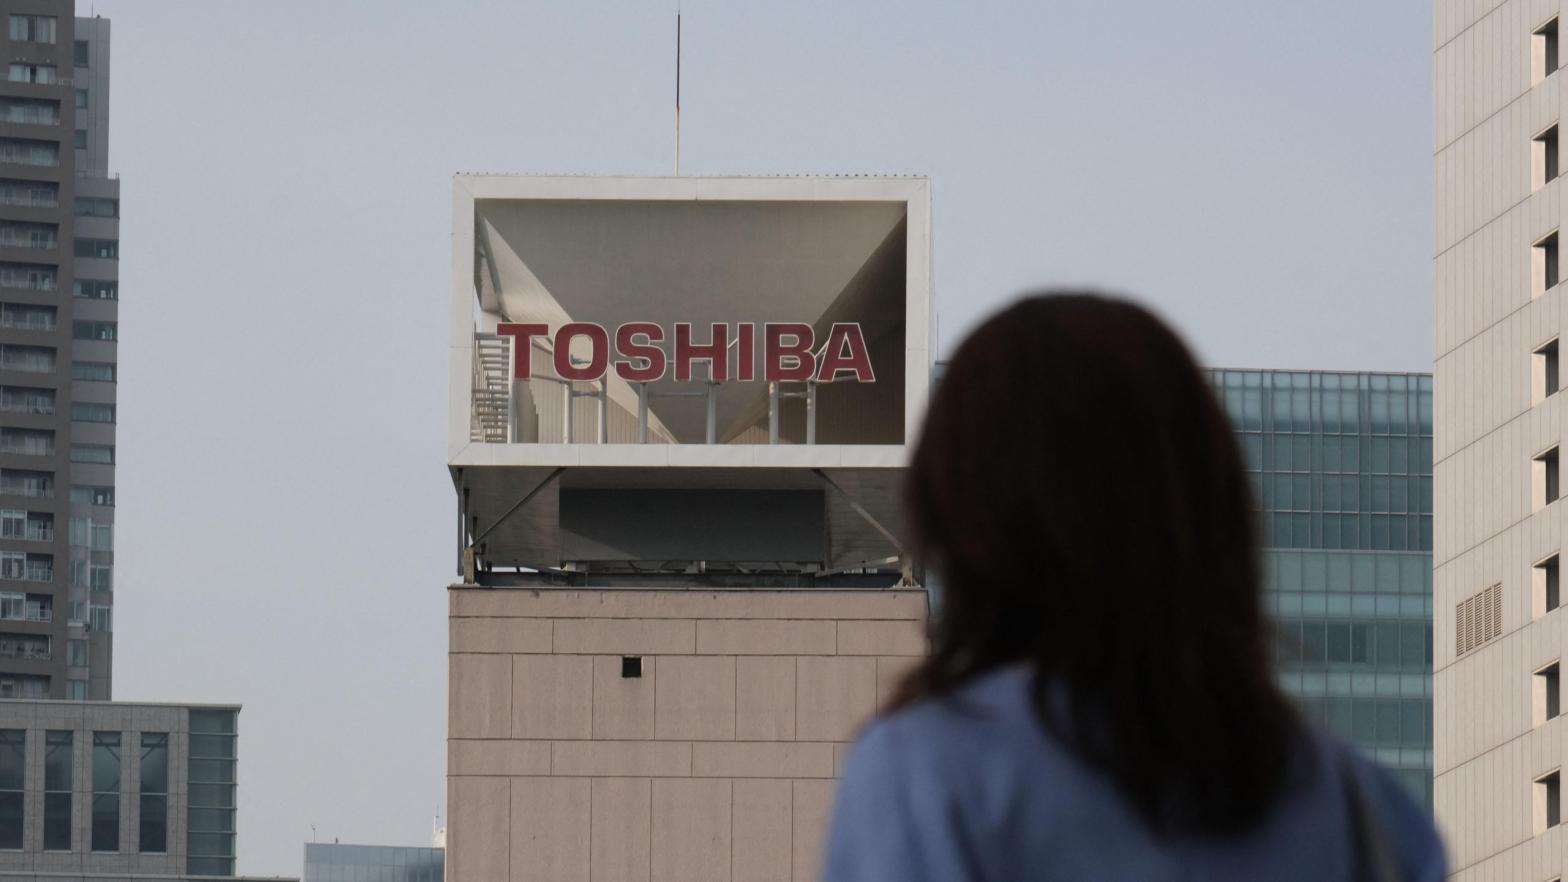 The logo of Japan's Toshiba is displayed at the company's headquarters in Tokyo. (Photo: Kazuhiro Nogi / AFP, Getty Images)